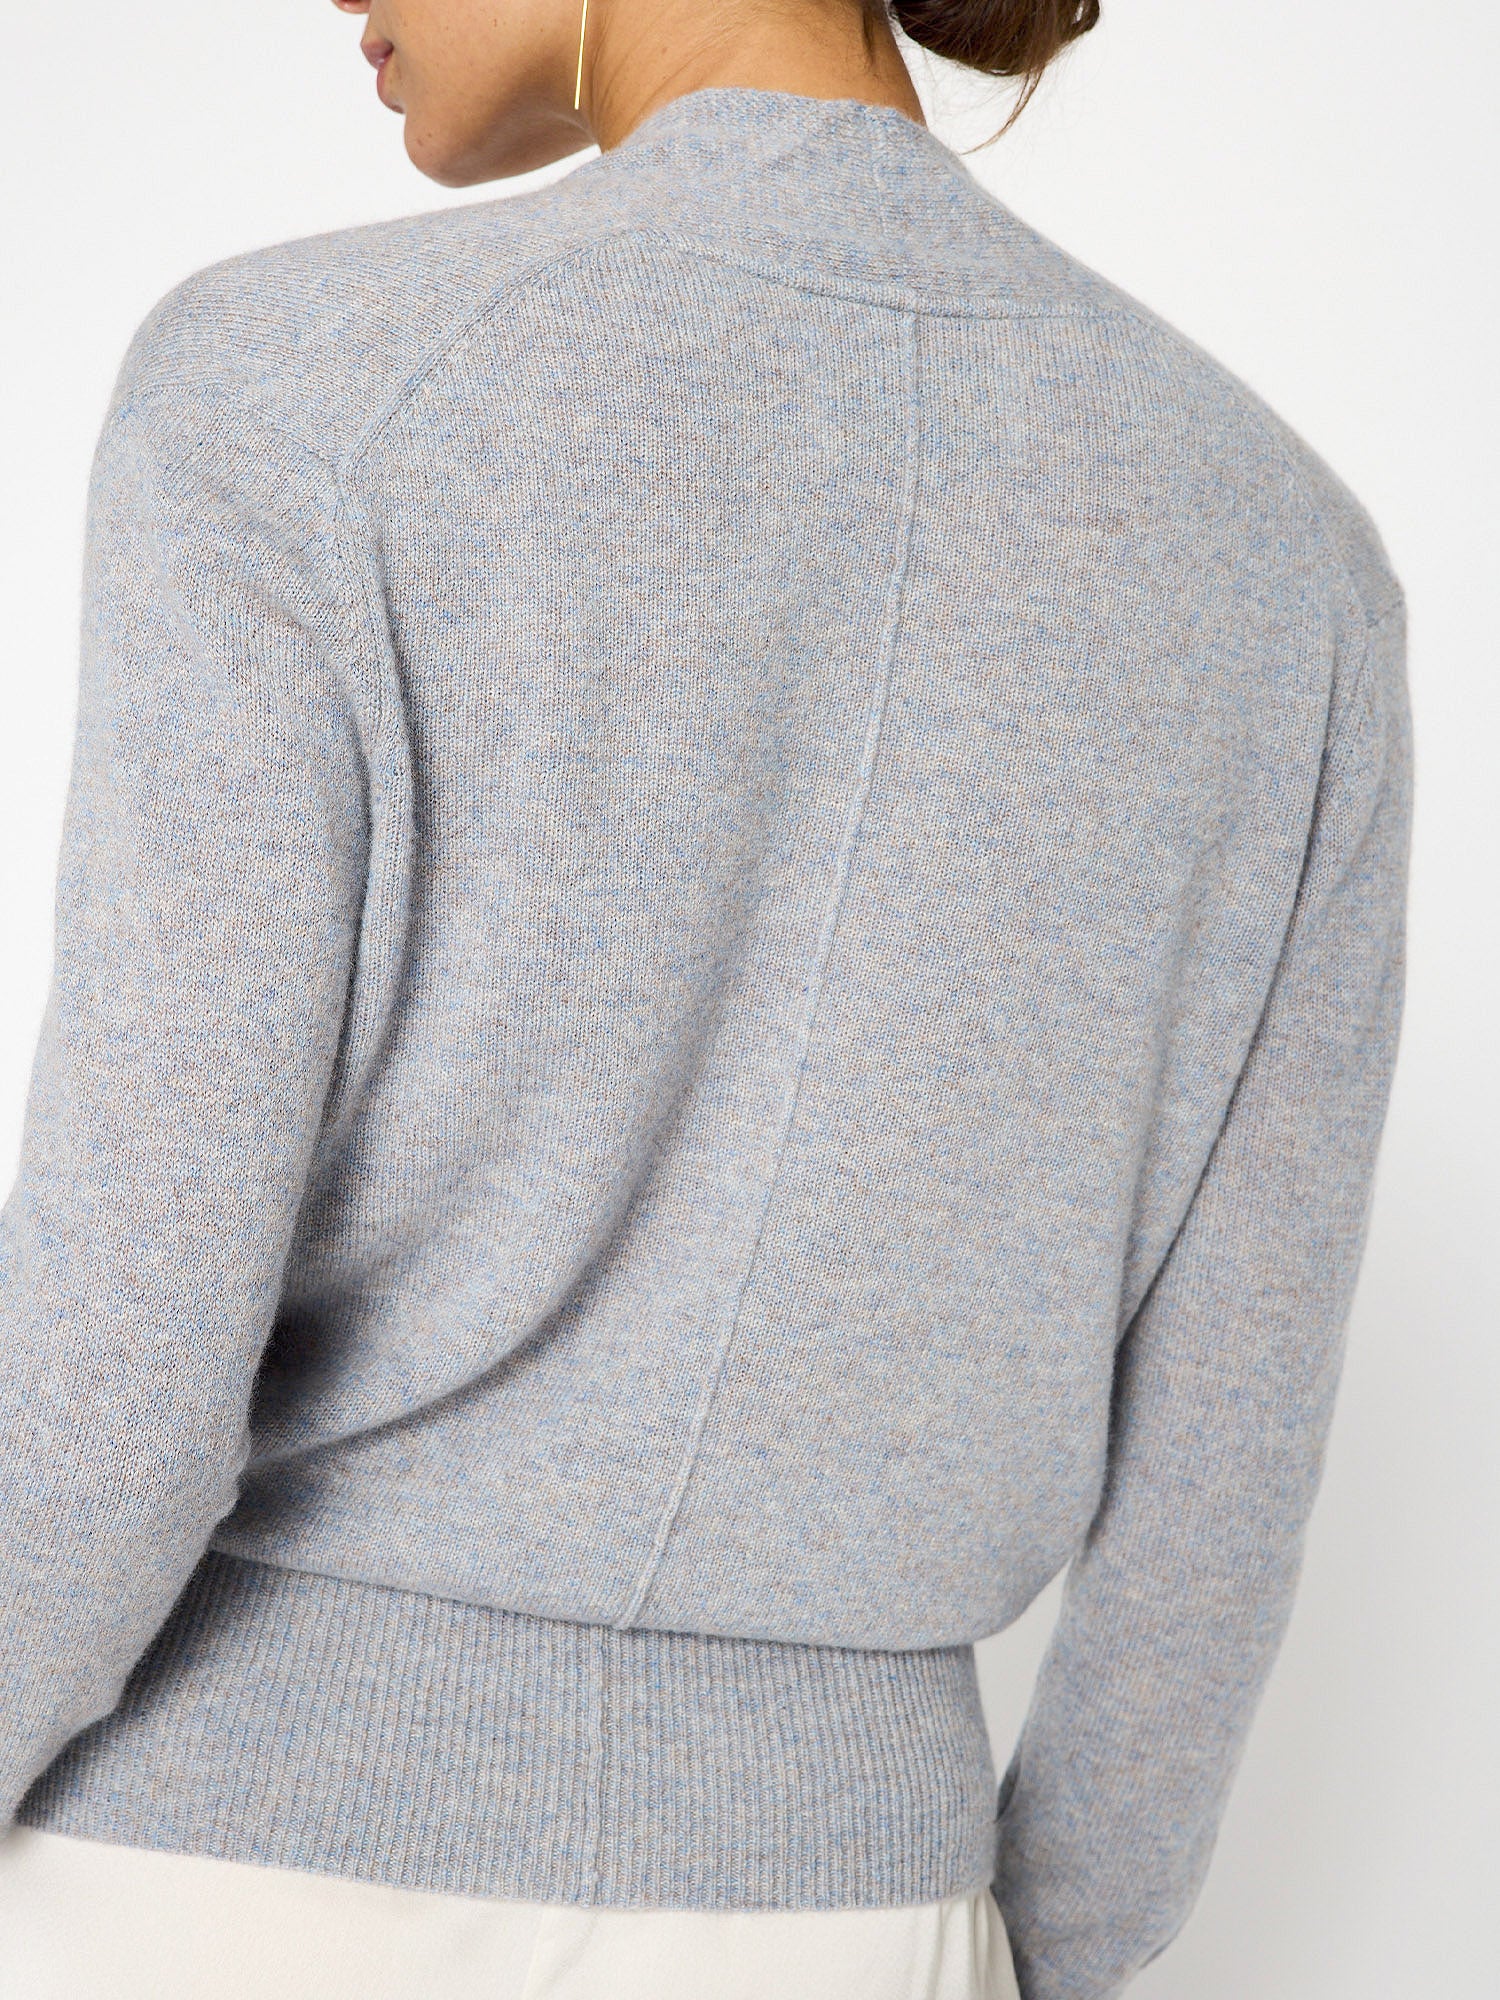 Phinneas cashmere v-neck blue wrap sweater back view